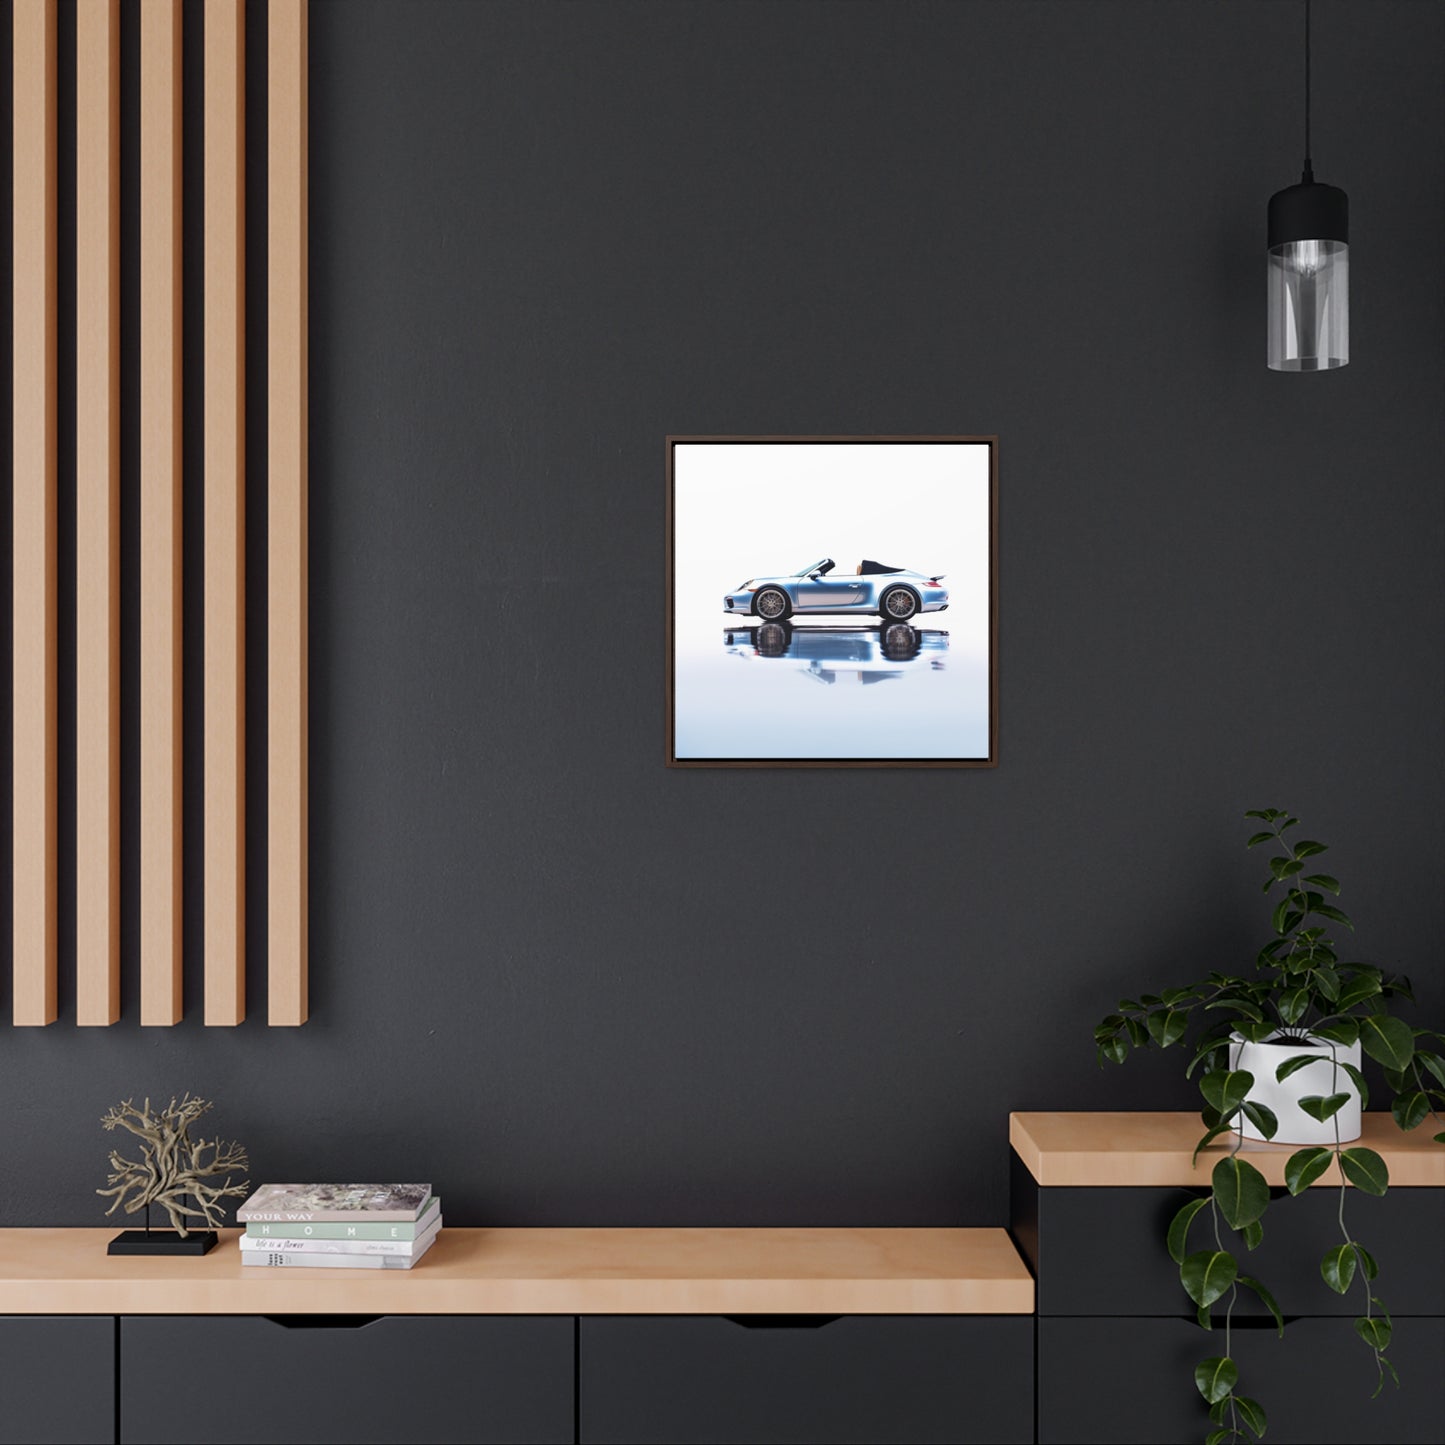 Gallery Canvas Wraps, Square Frame 911 Speedster on water 1